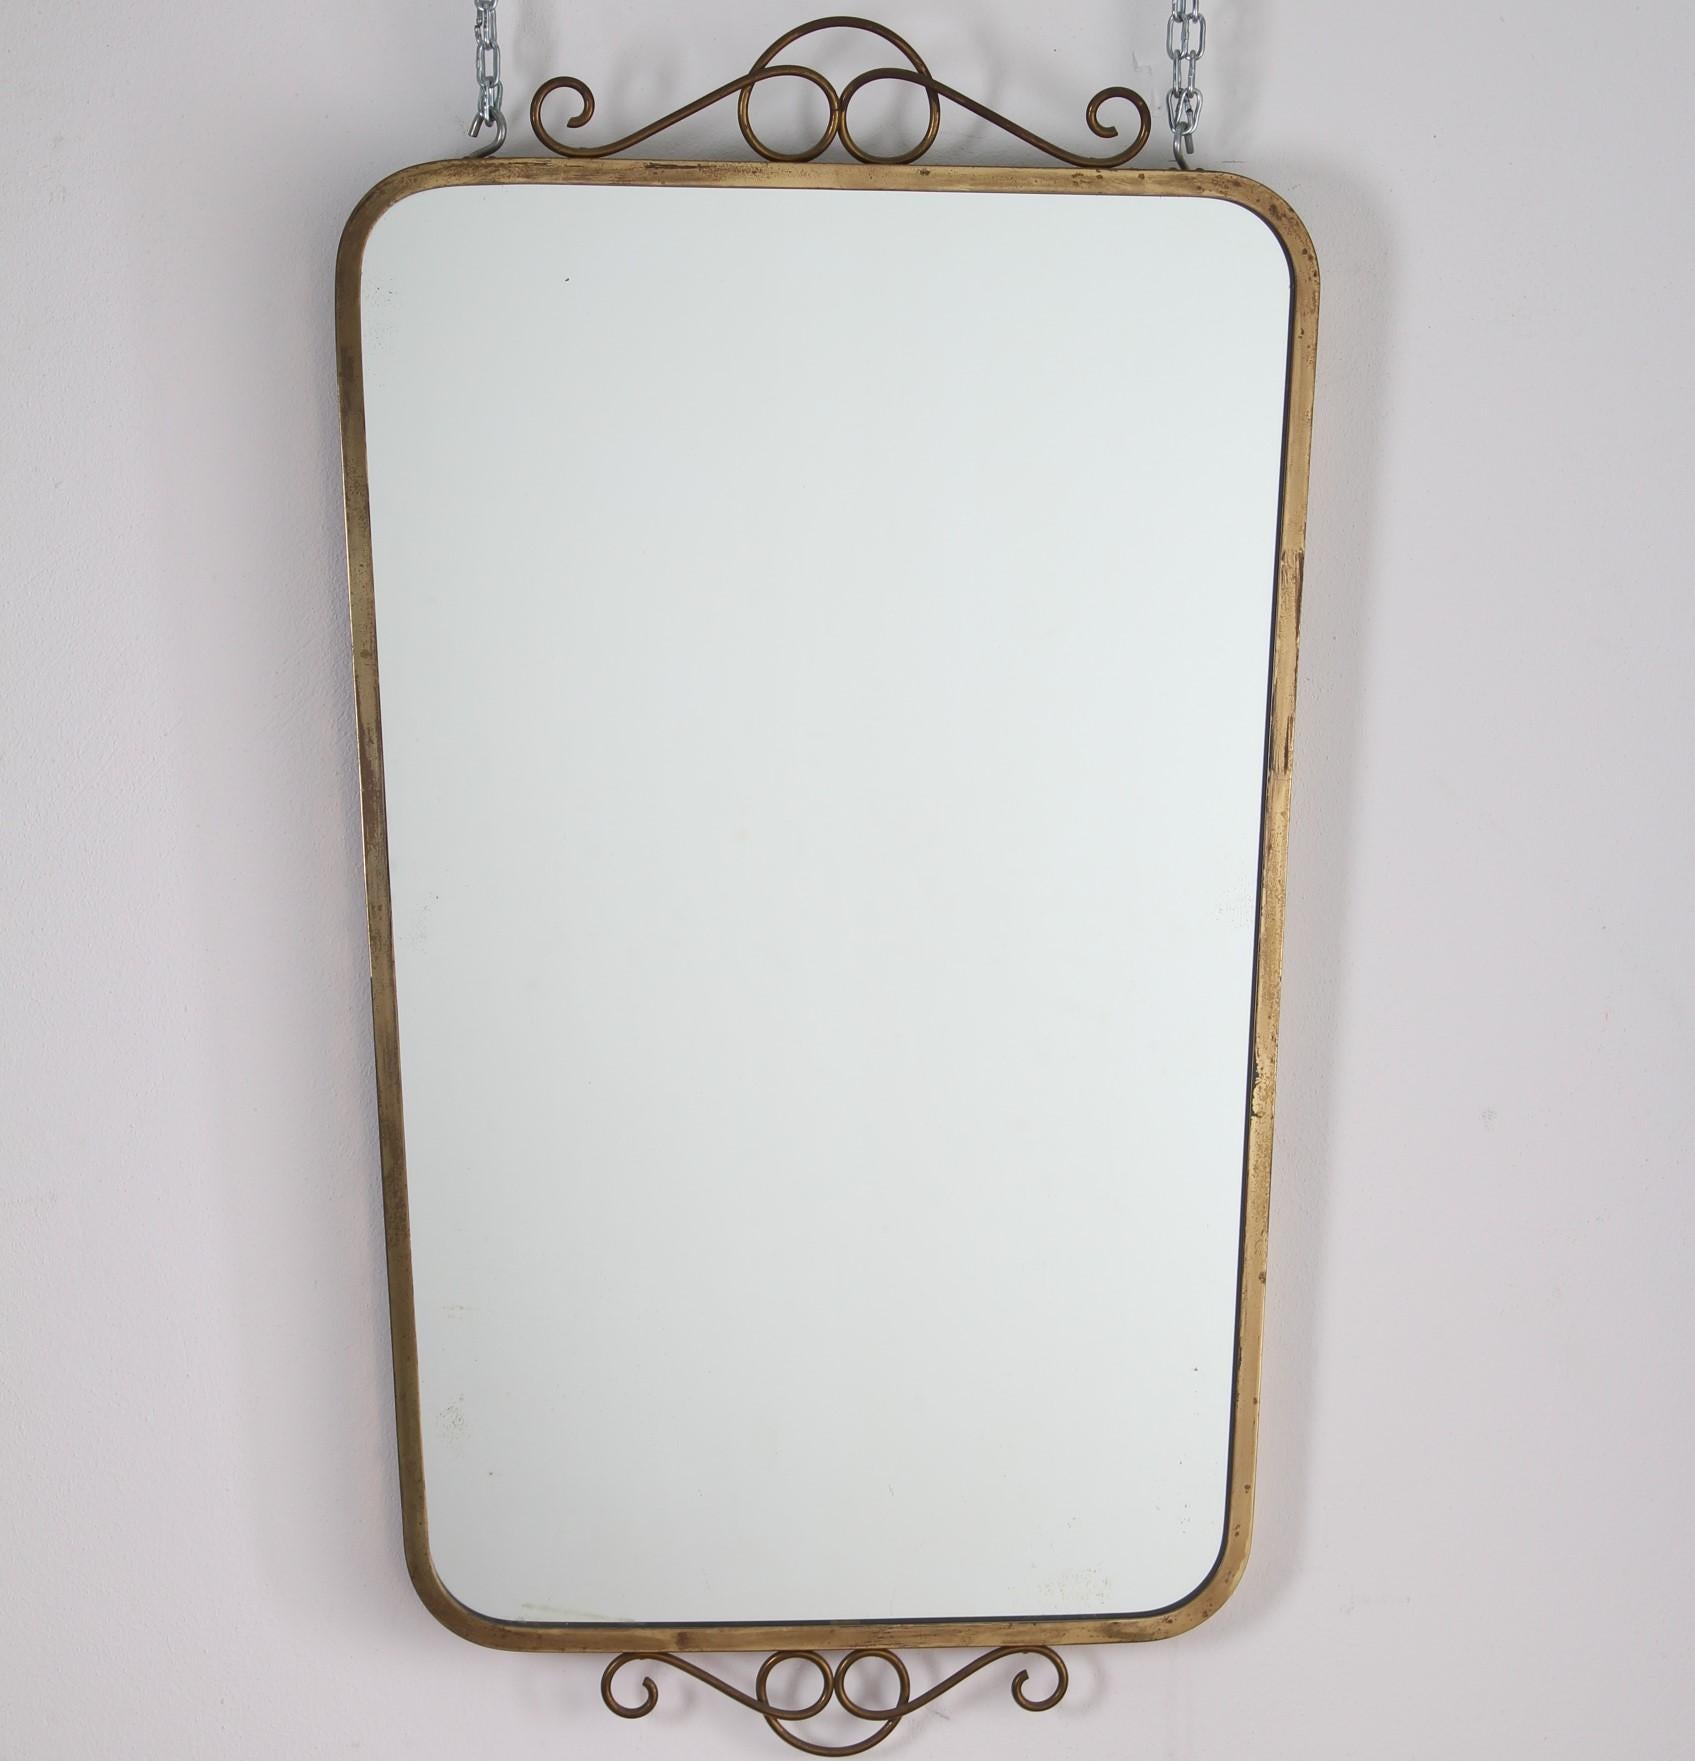 Very stylish 1950s Italian wall mirror, with a nice patina to the brass, generally in very good condition.
Wear consistent with age and use.